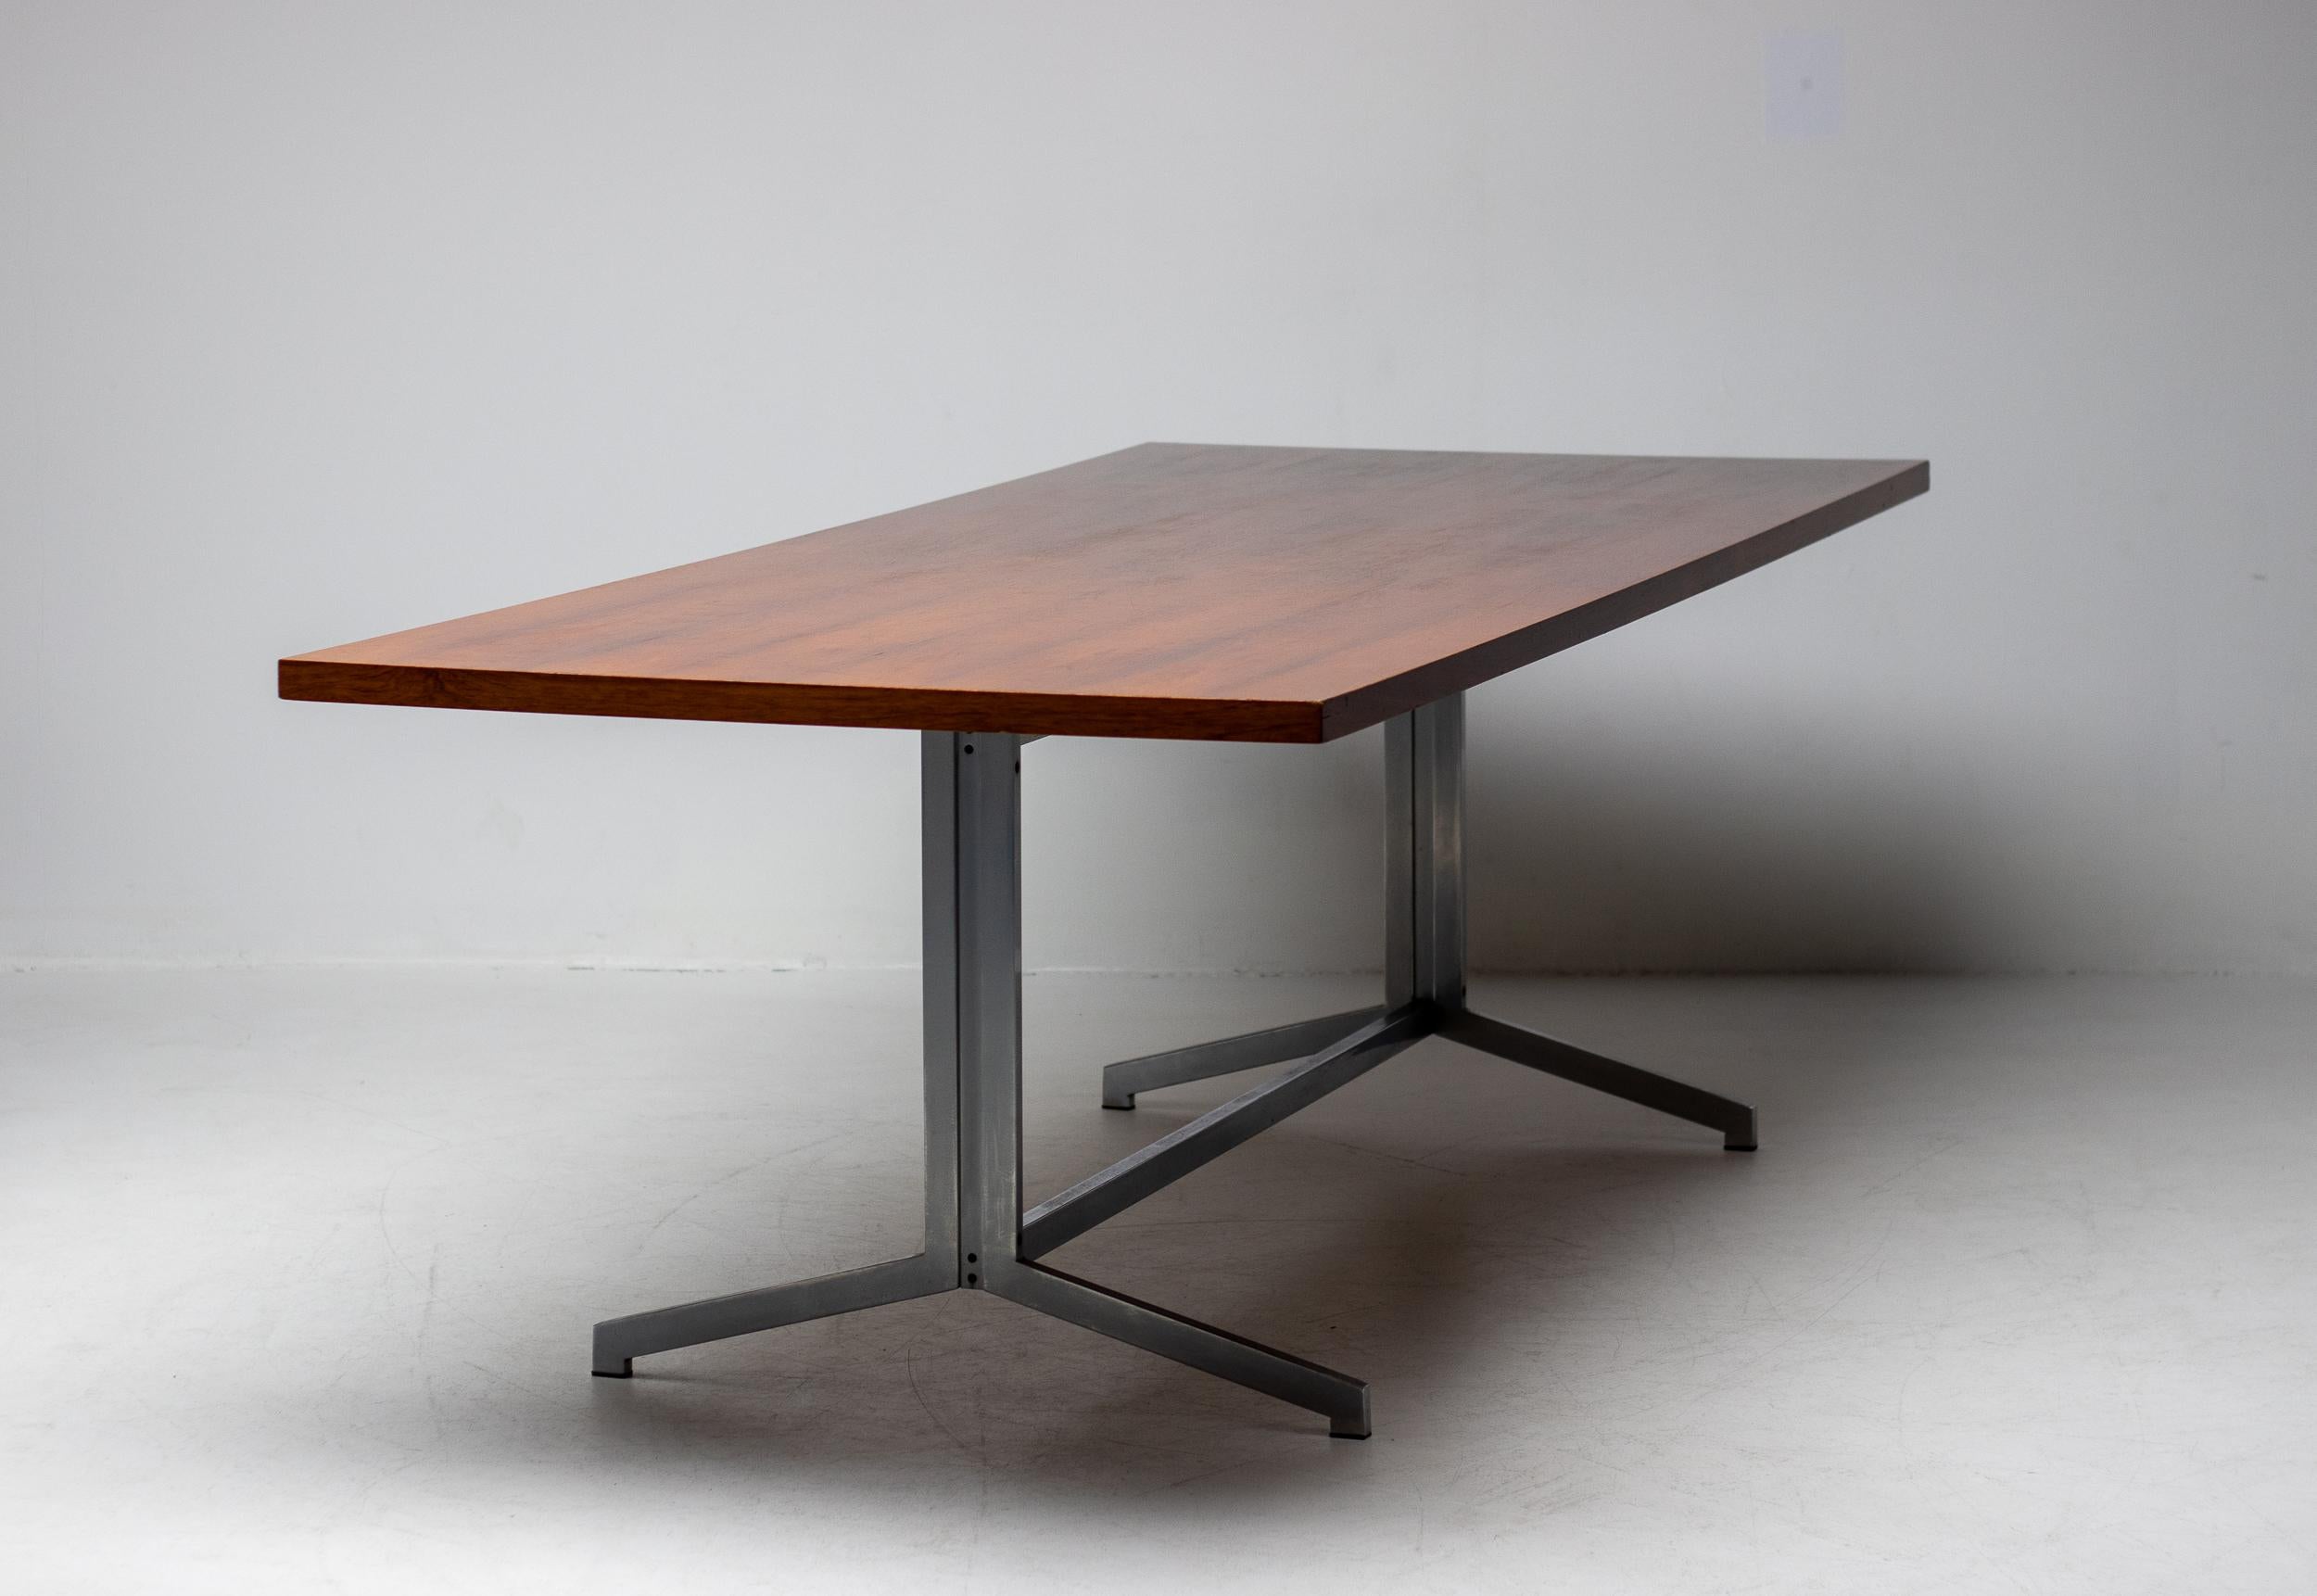 Large Mid-Century Modern stainless steel table with a beautiful rosewood top.
Good vintage condition with many superficial scratches on the top but no veneer damage.
Could be refinished to perfection but we prefer this original patina.
 